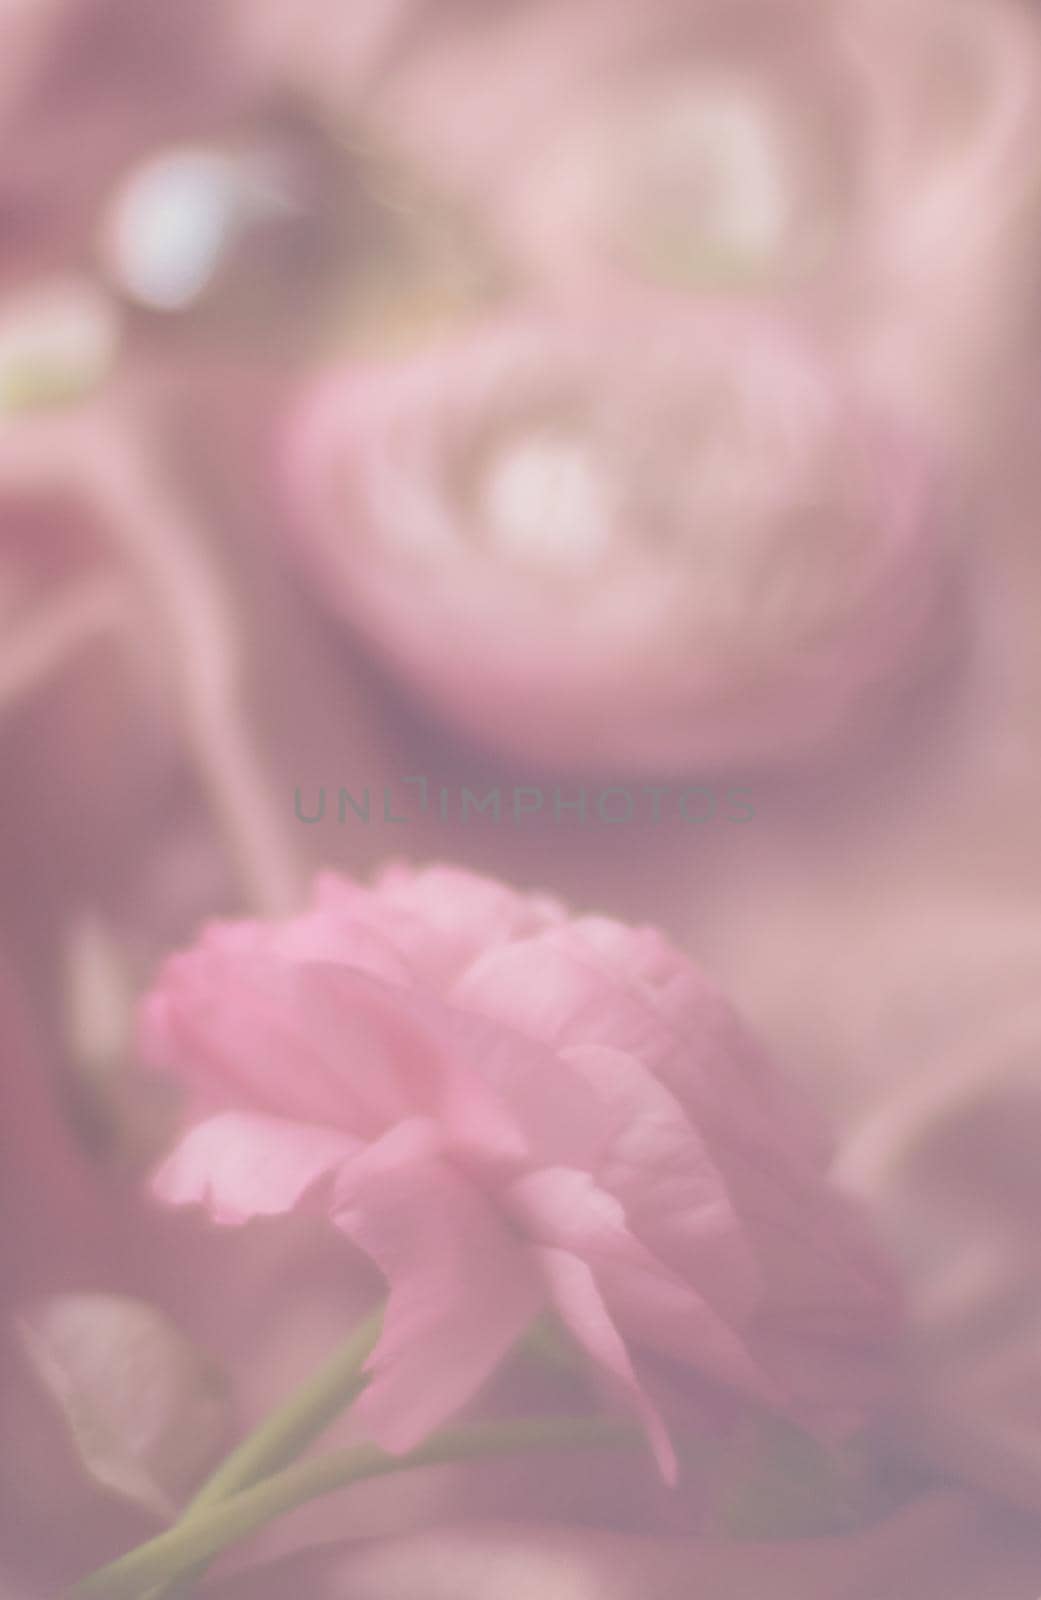 pink rose flowers on soft silk - wedding, holiday and floral background styled concept